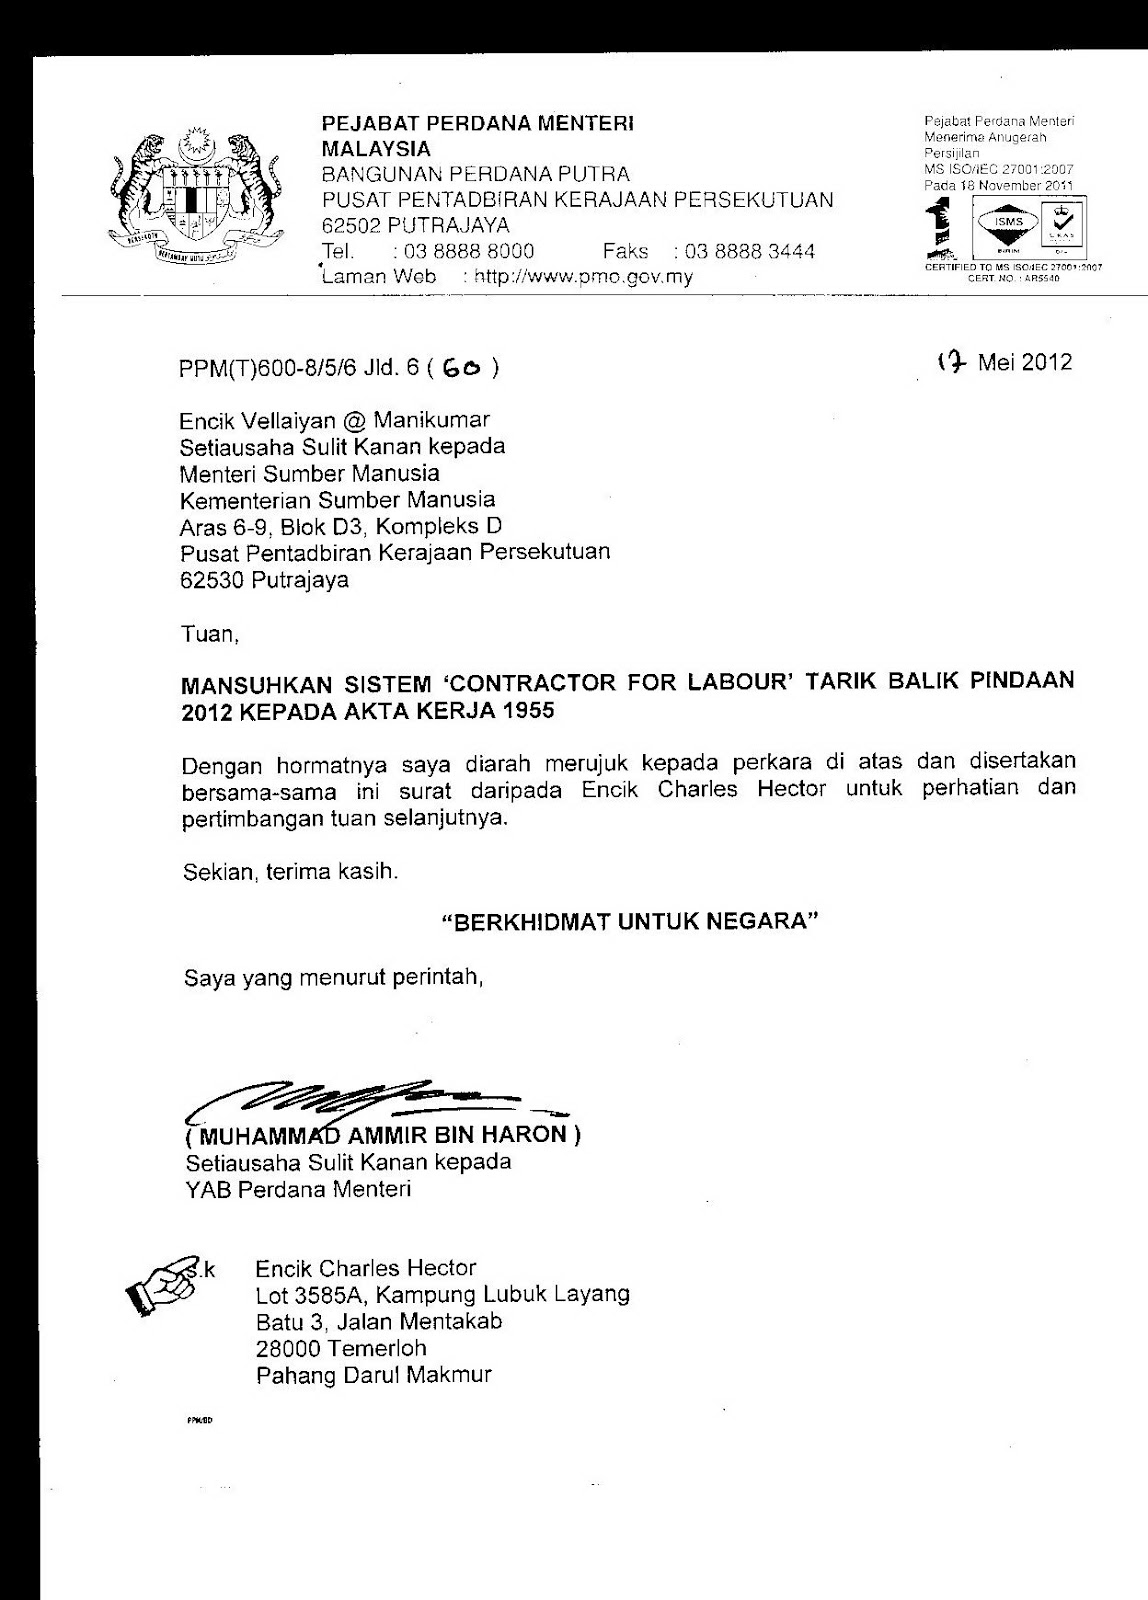 Contoh Offer Letter Bahasa Malaysia - sample letter in bahasa malaysia 